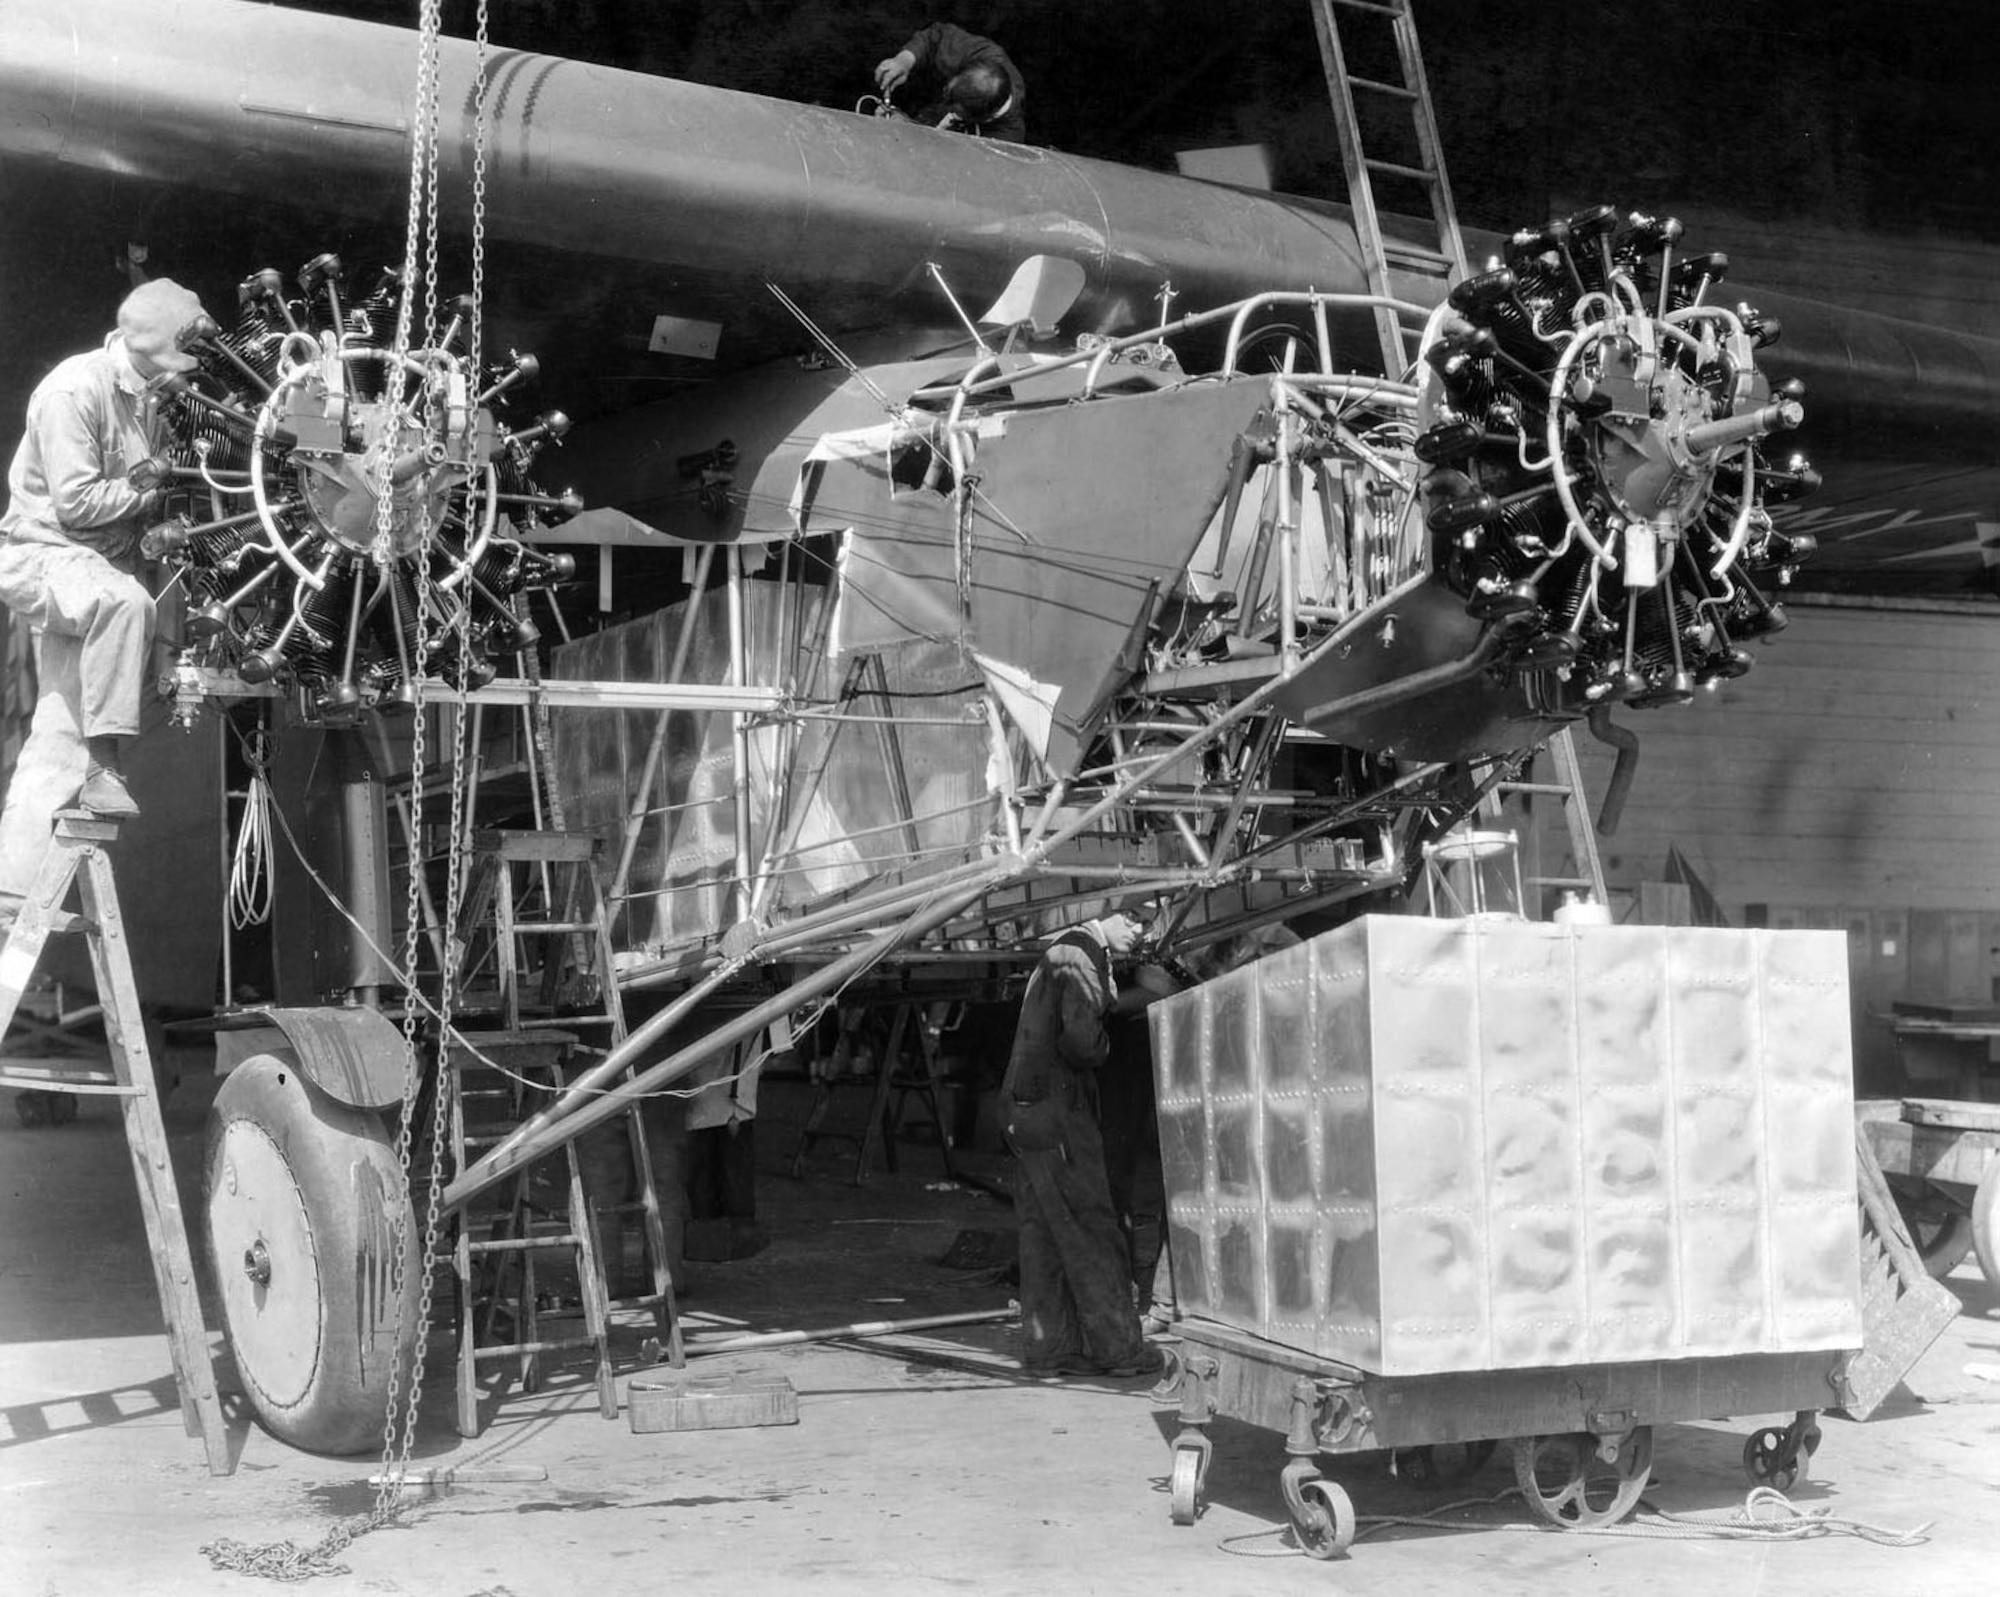 Atlantic-Fokker C-2 "Bird of Paradise" during modification. Rear auxiliary installed, front auxiliary tank ready for installation. (U.S. Air Force photo)